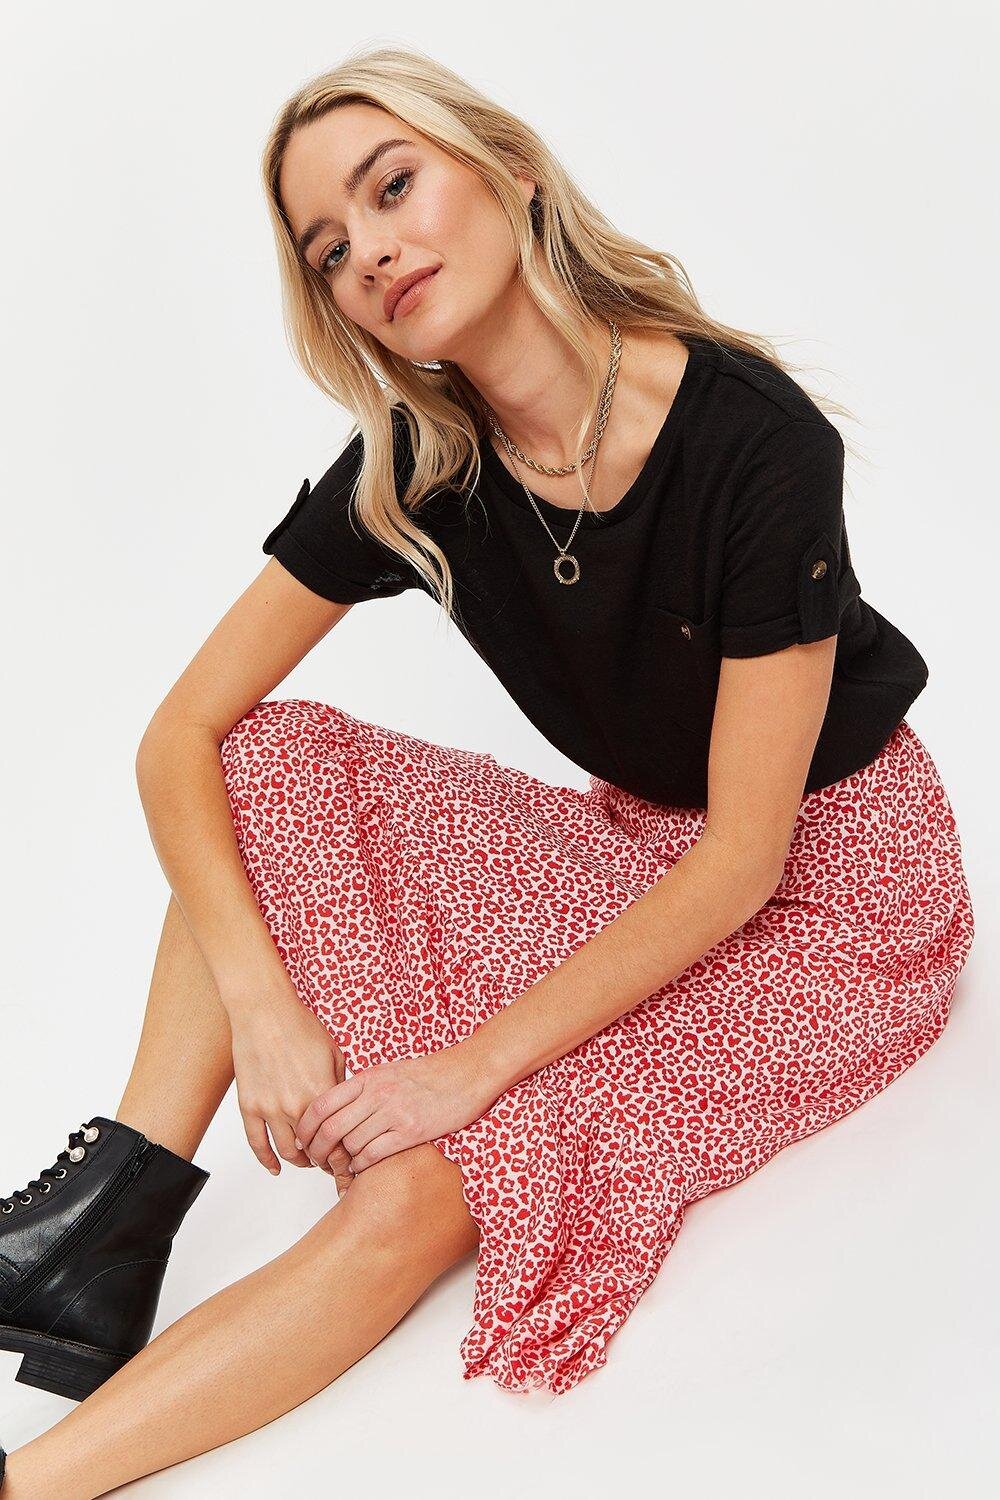 Harajuku Y2K Low Waist Mini Plaid Skirt With Pant Womens Dark Gothic Black  And White Punk Skull Waistedband Dorothy Perkins Skirts Plus Size From  Dao01, $24.5 | DHgate.Com